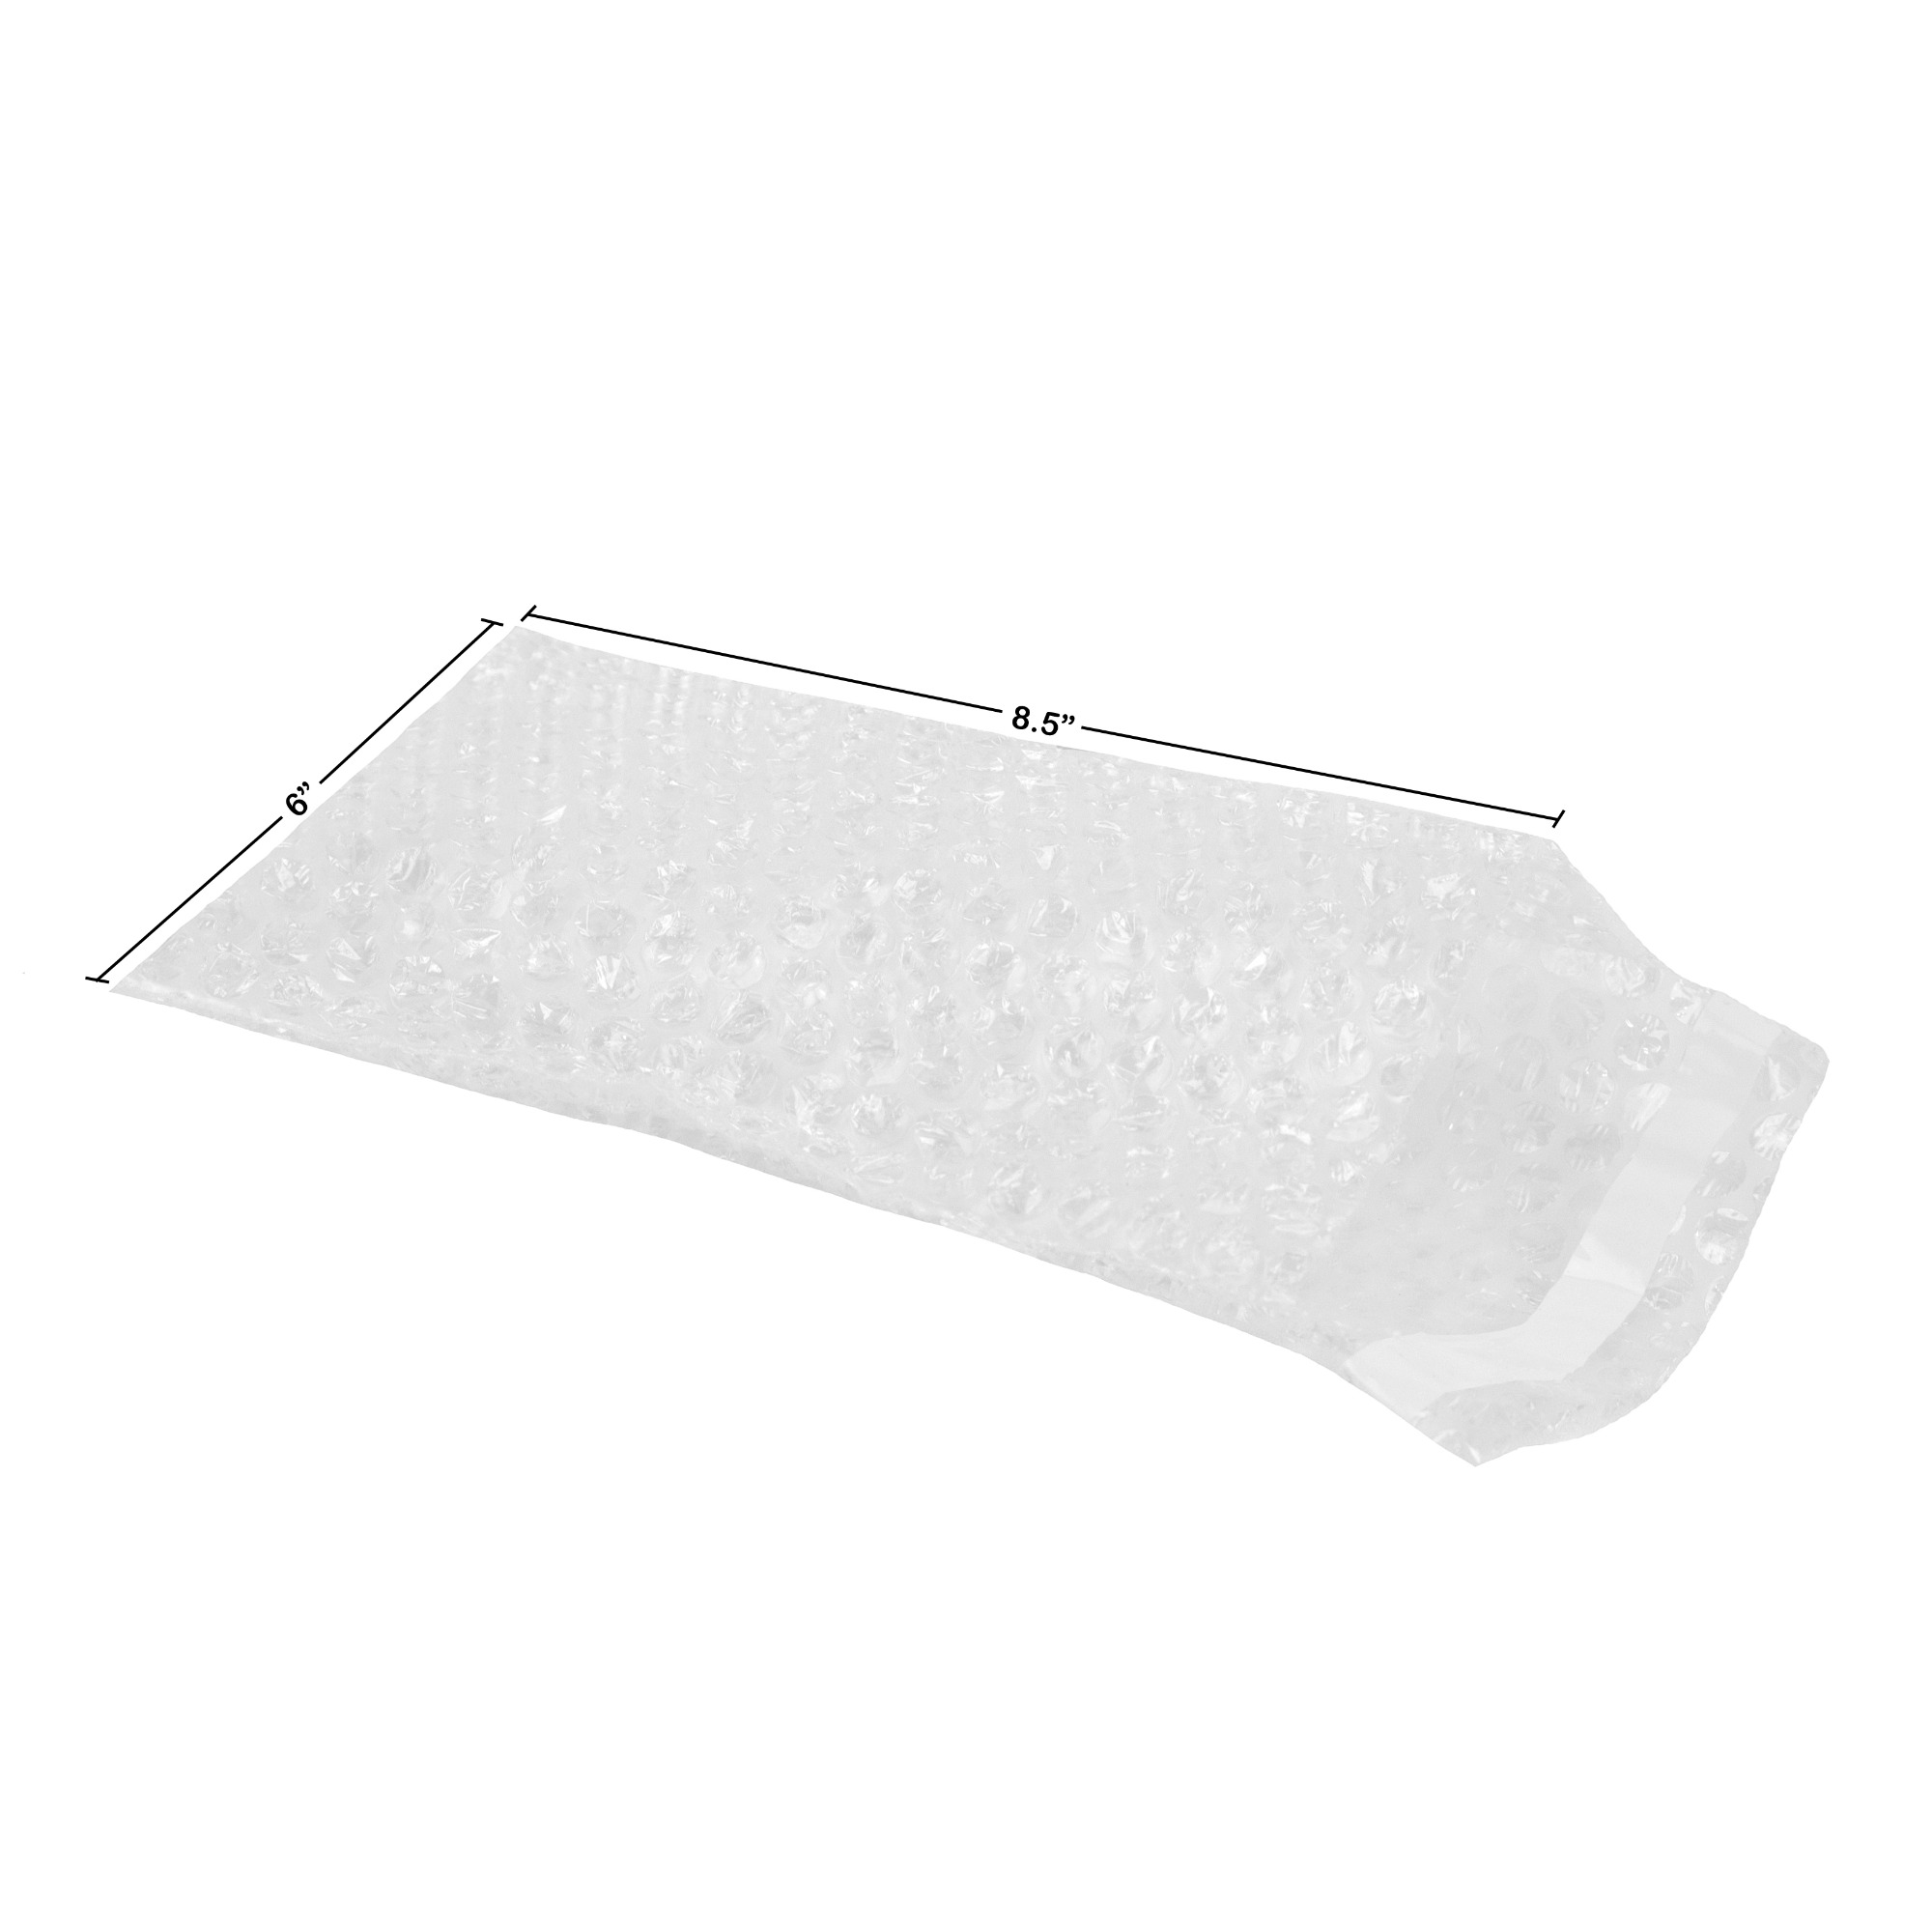 UBOXES Bubble Out Bags Clear Protective Wrap Cushioning Pouches Self Sealing 6 x 8.5 - Pack of 50